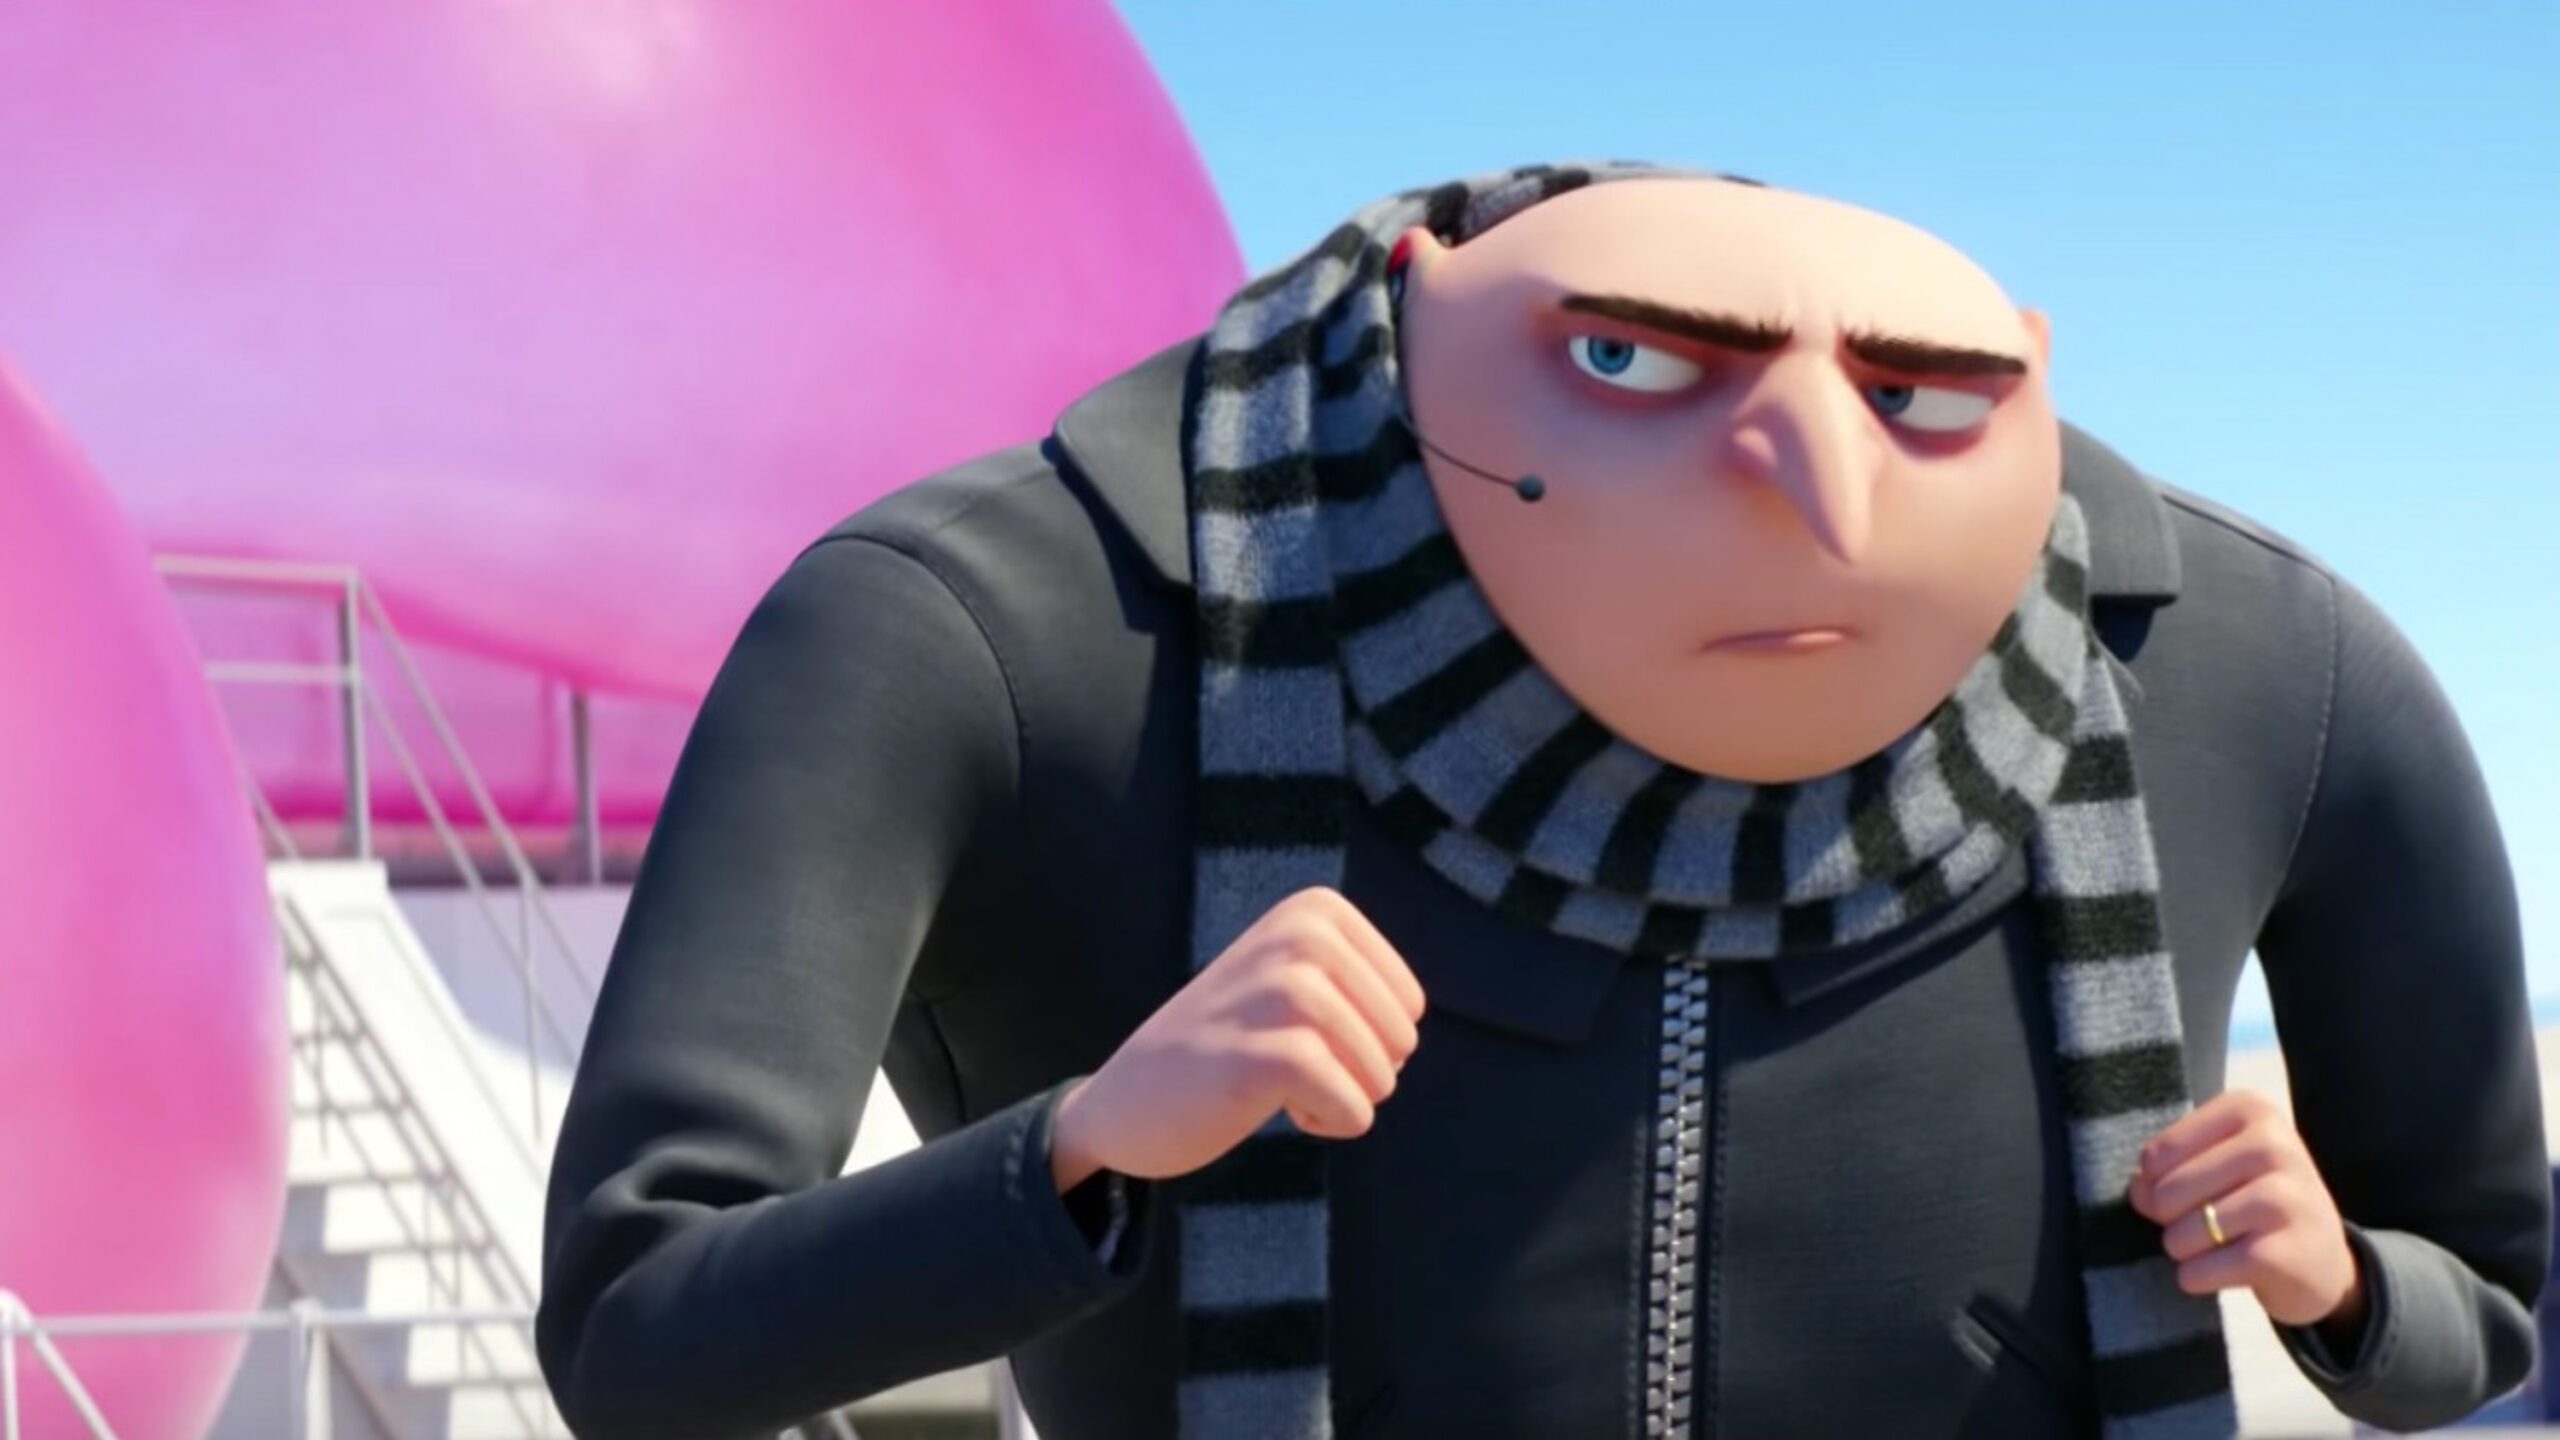 WATCH: ‘Despicable Me 3’ trailer released